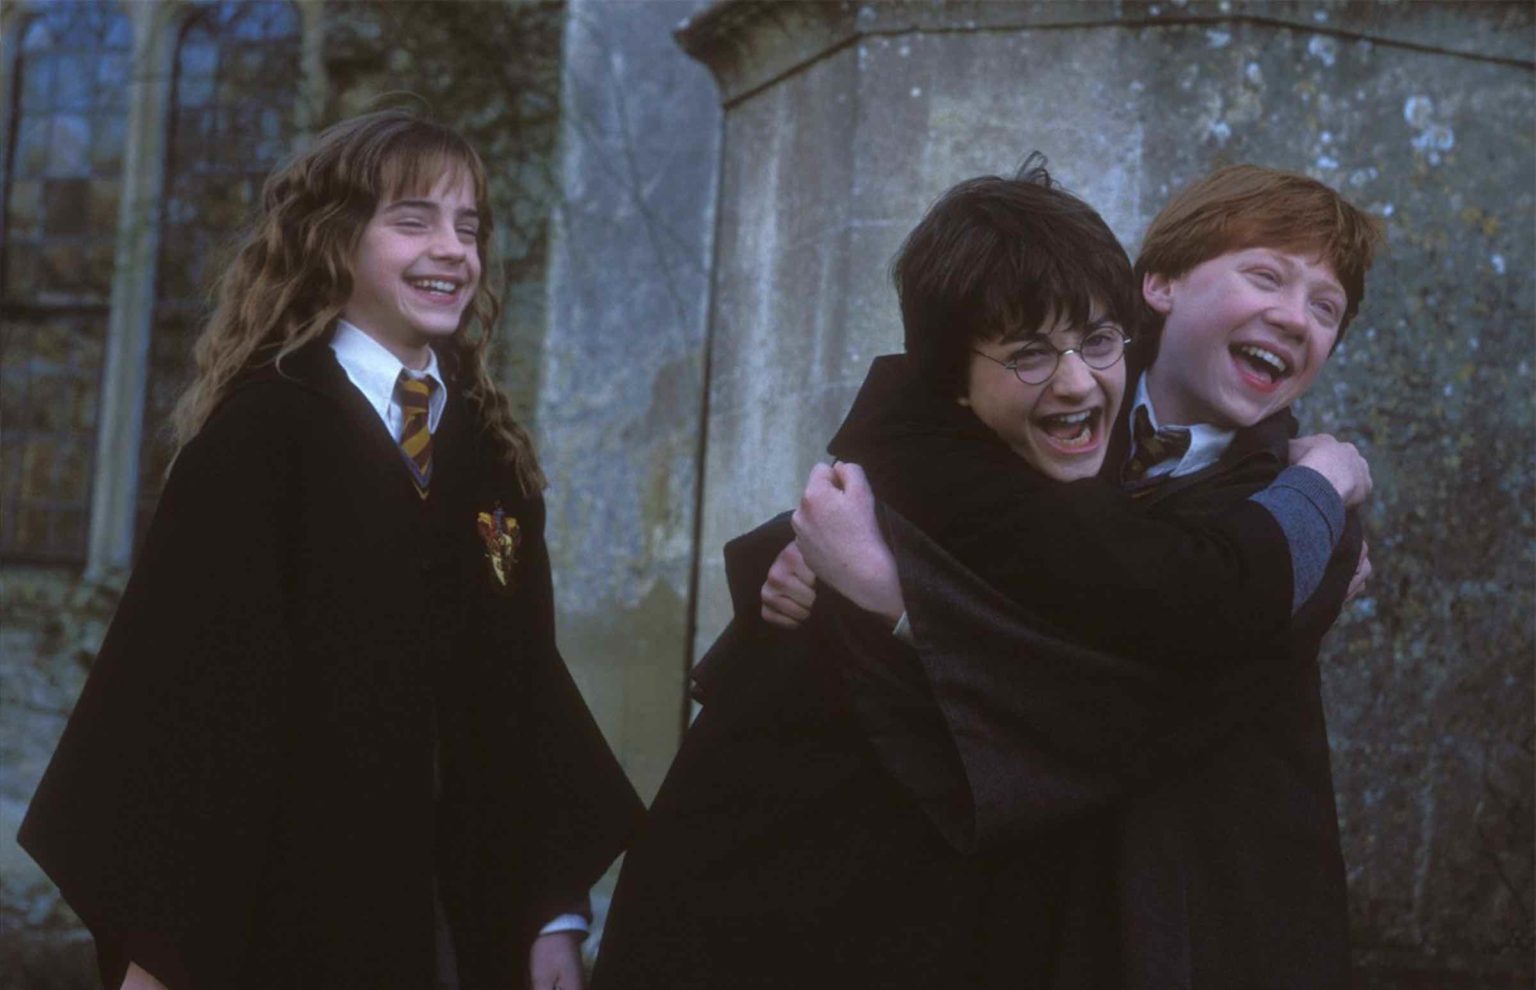 Here are the best 'Harry Potter' memes worthy of a bunch of last-minute points to your house of choice that will send any Potterhead chuckling.